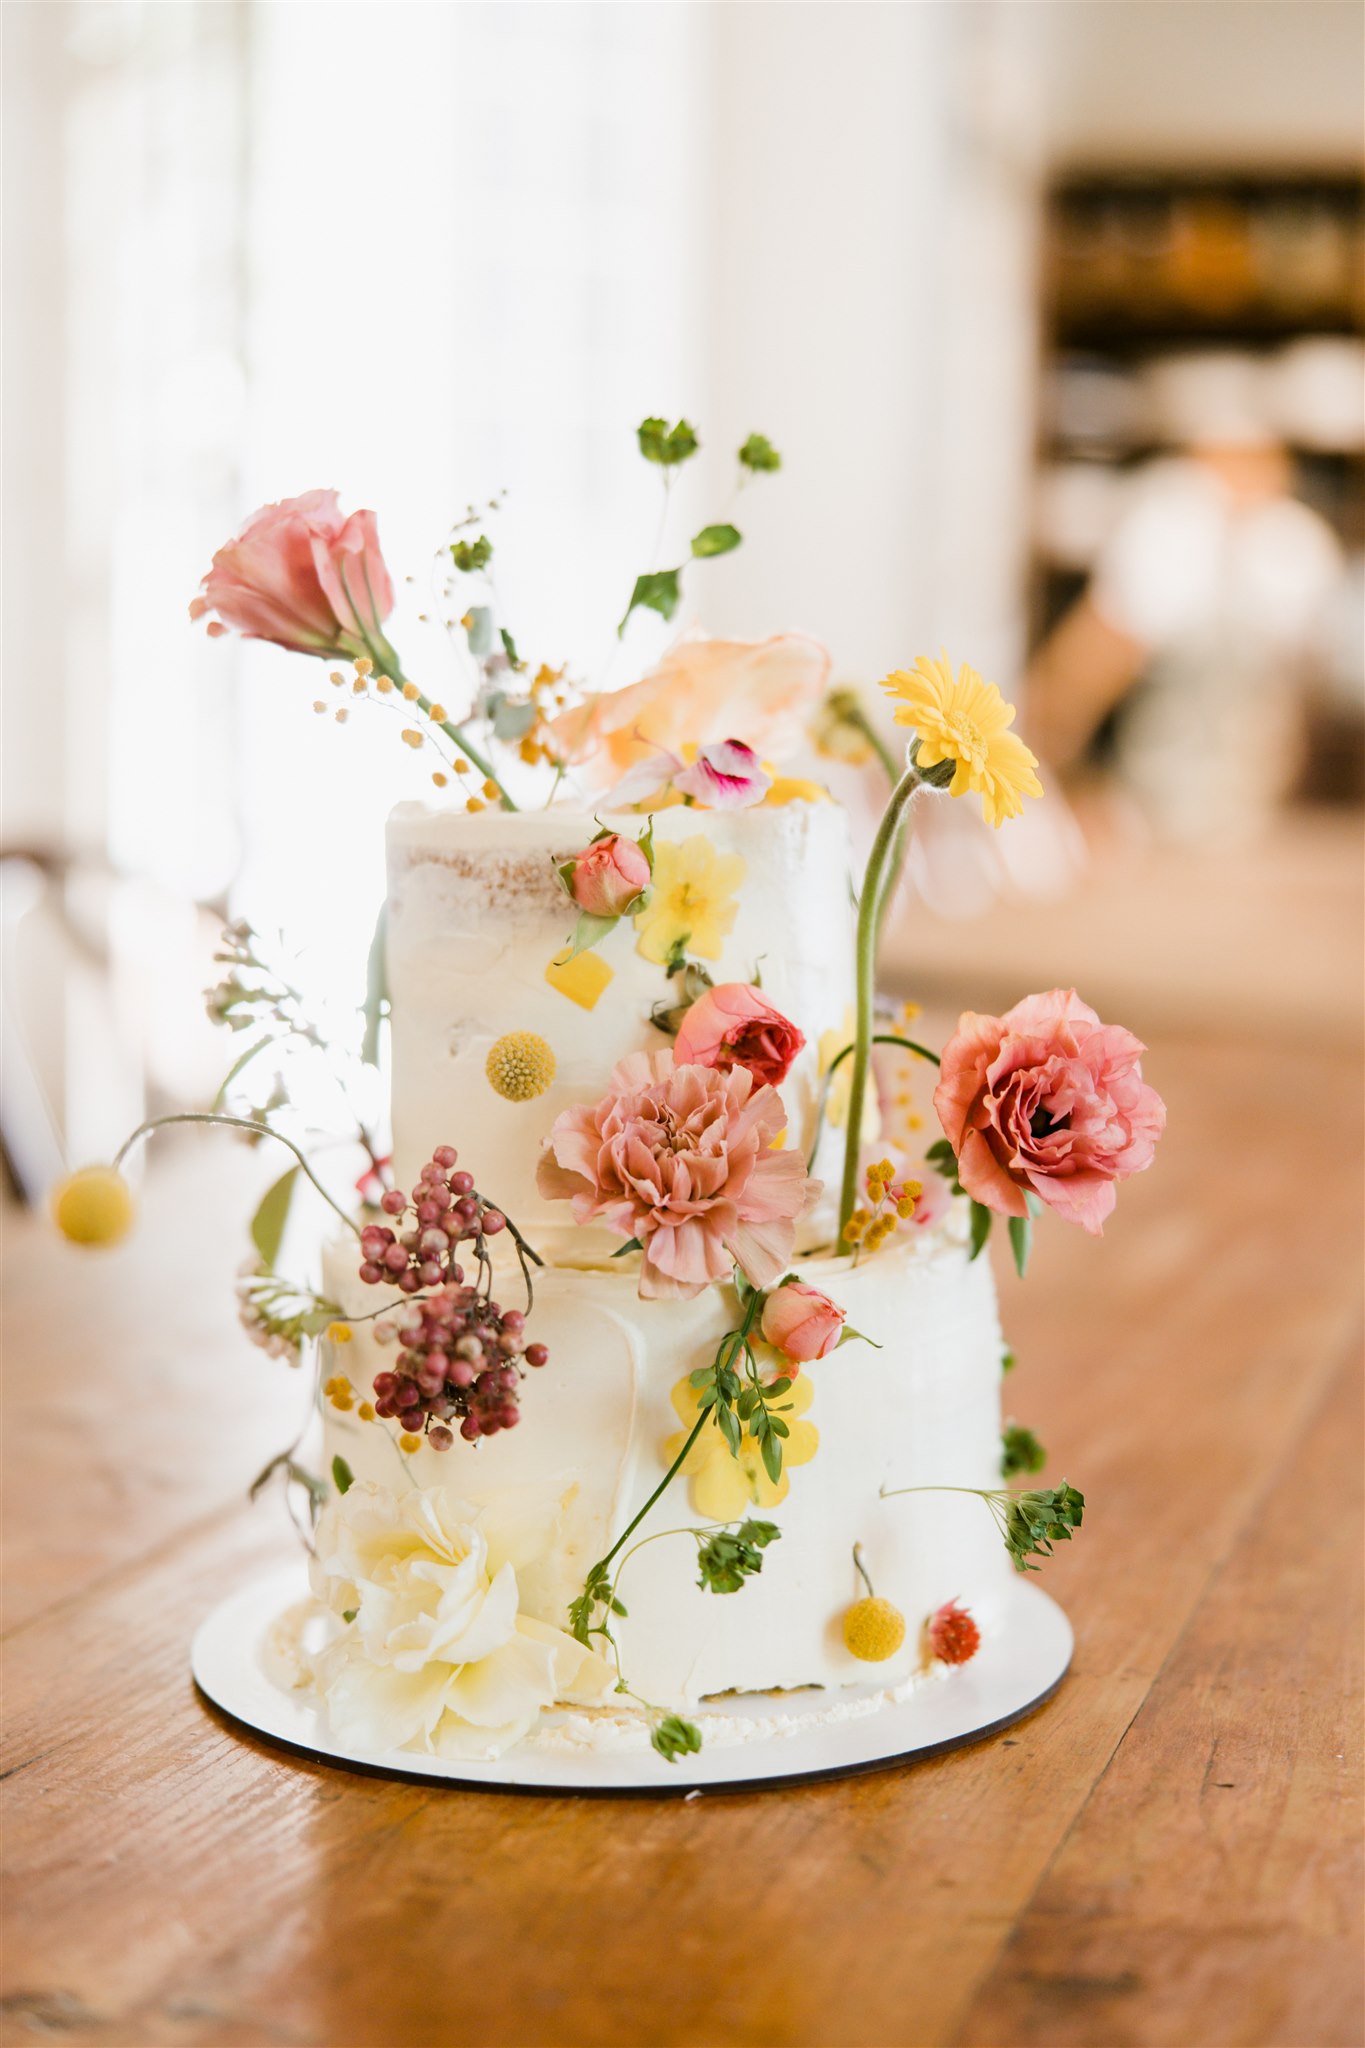 Stunning floral wedding cake waits patiently for its big moment during a dreamy Sobremesa wedding day